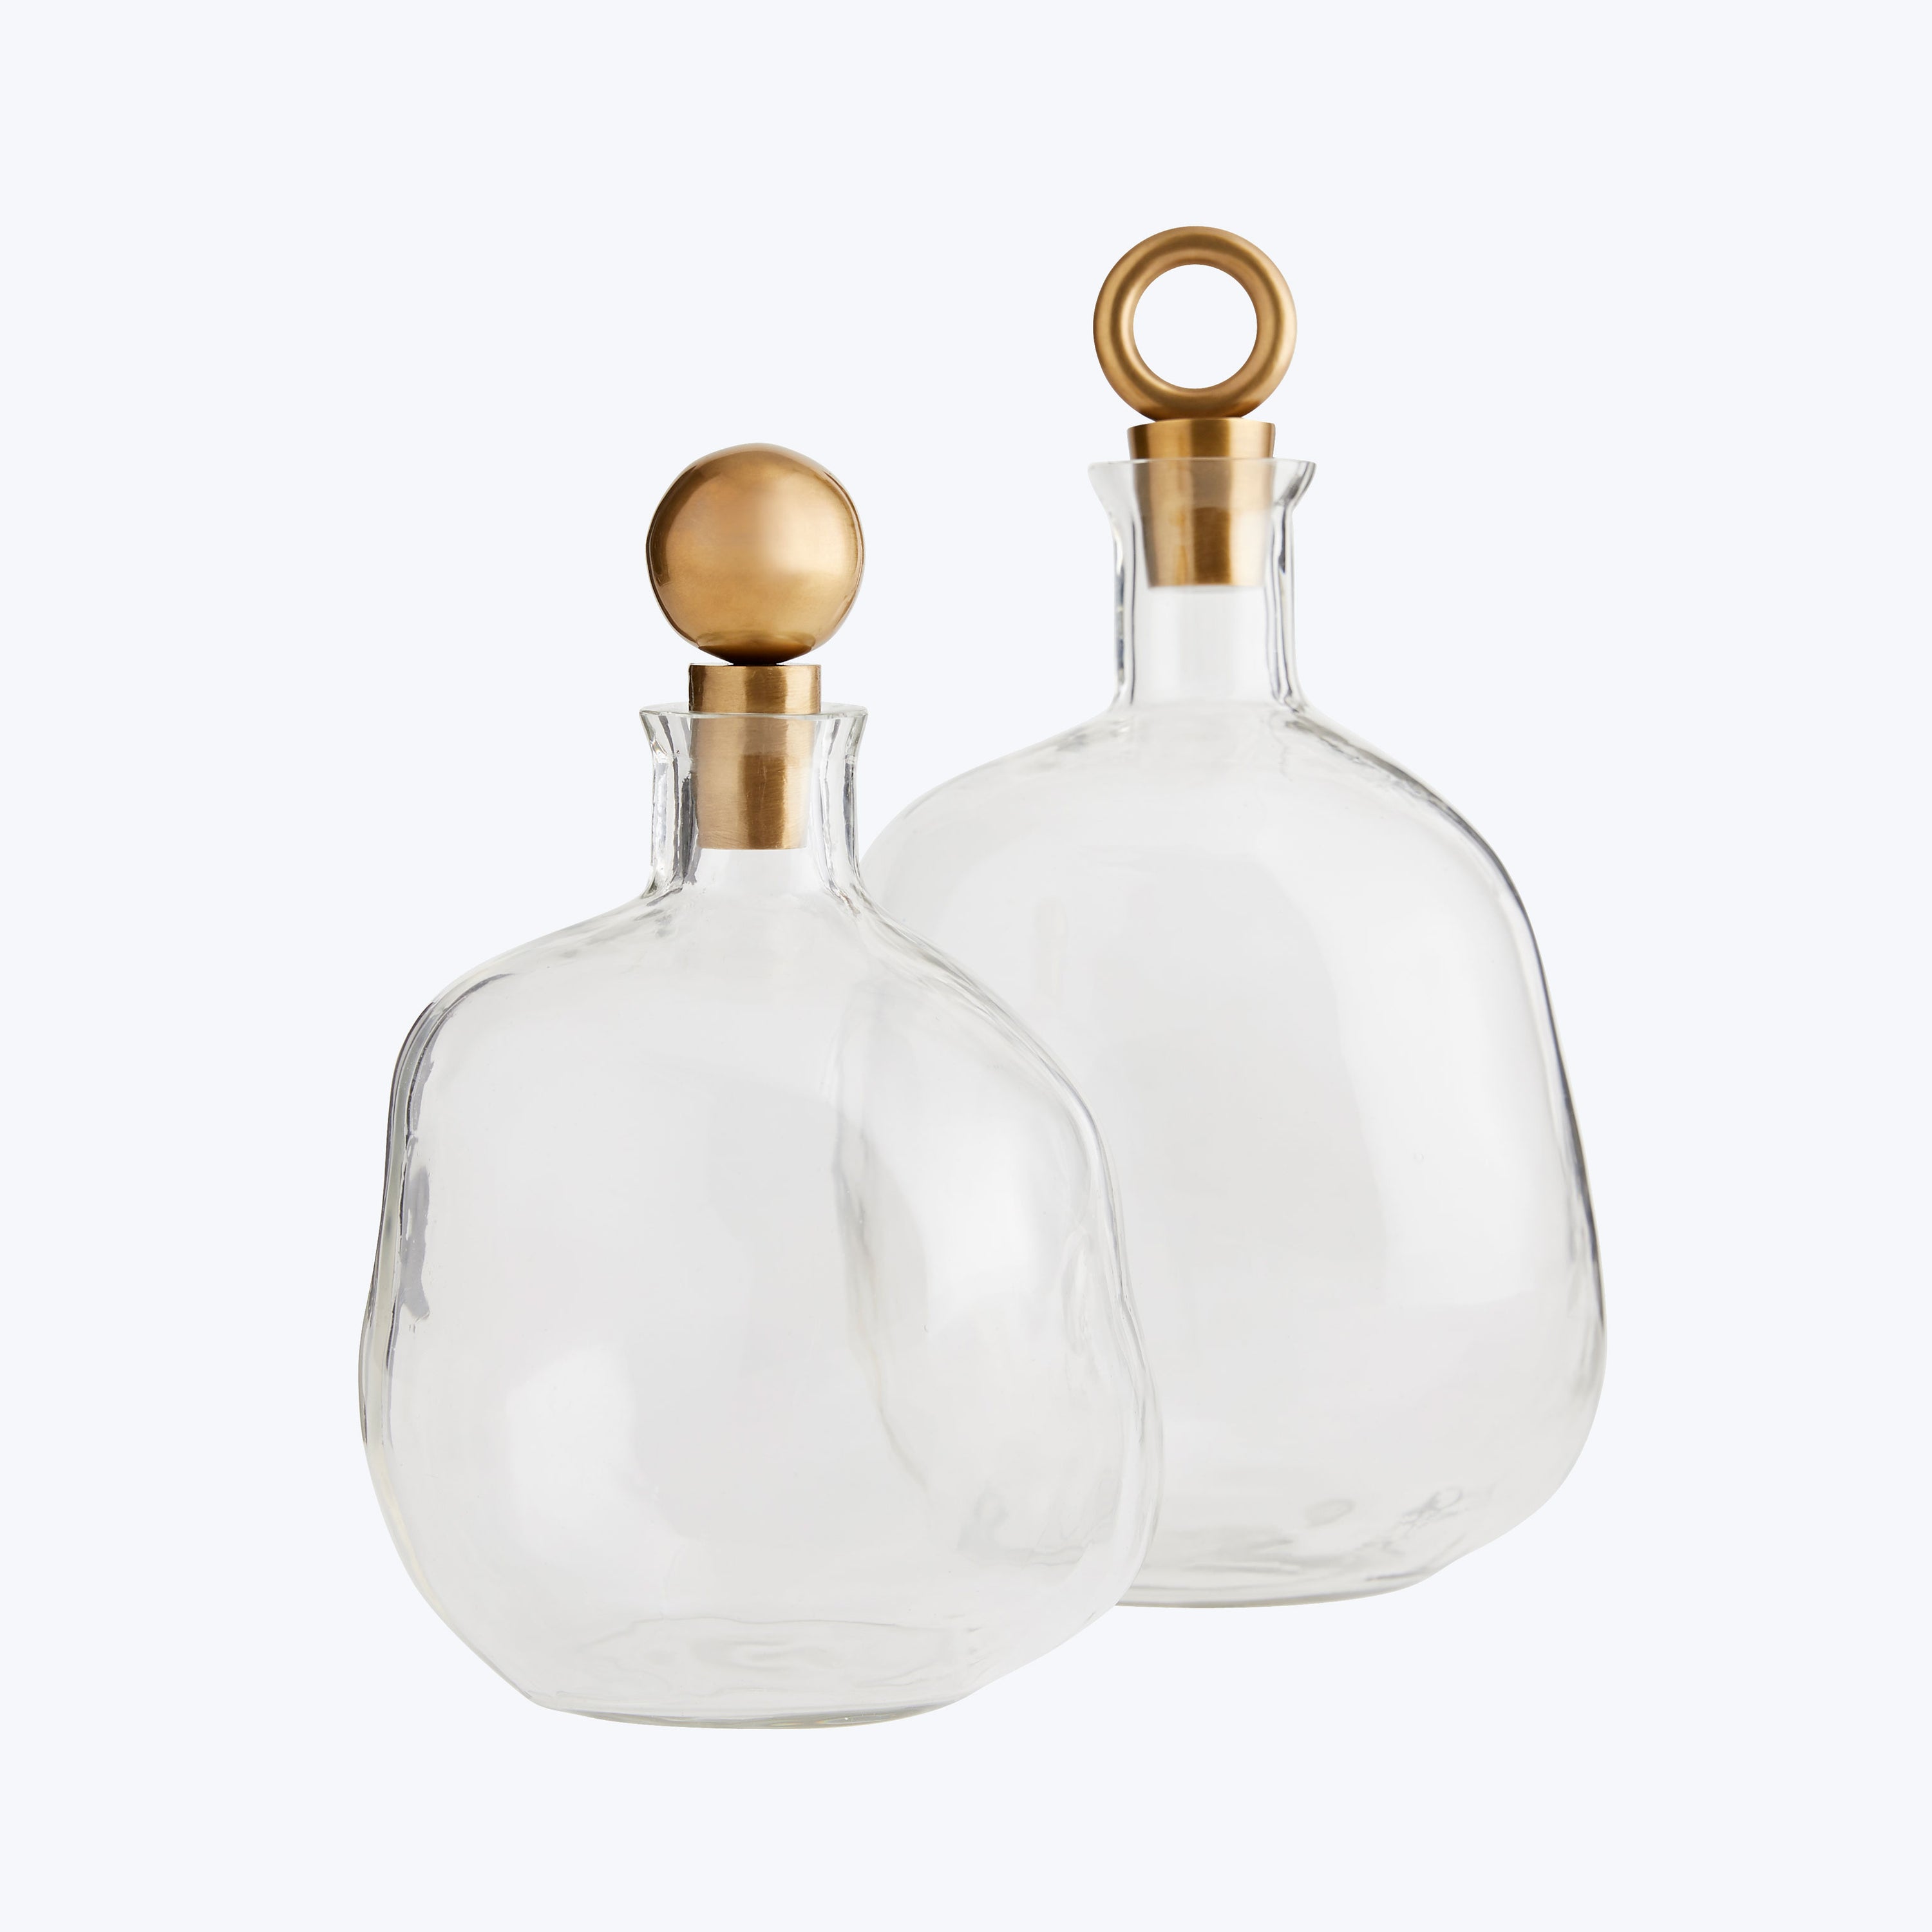 Two elegant glass bottles with golden decorative stoppers on white.